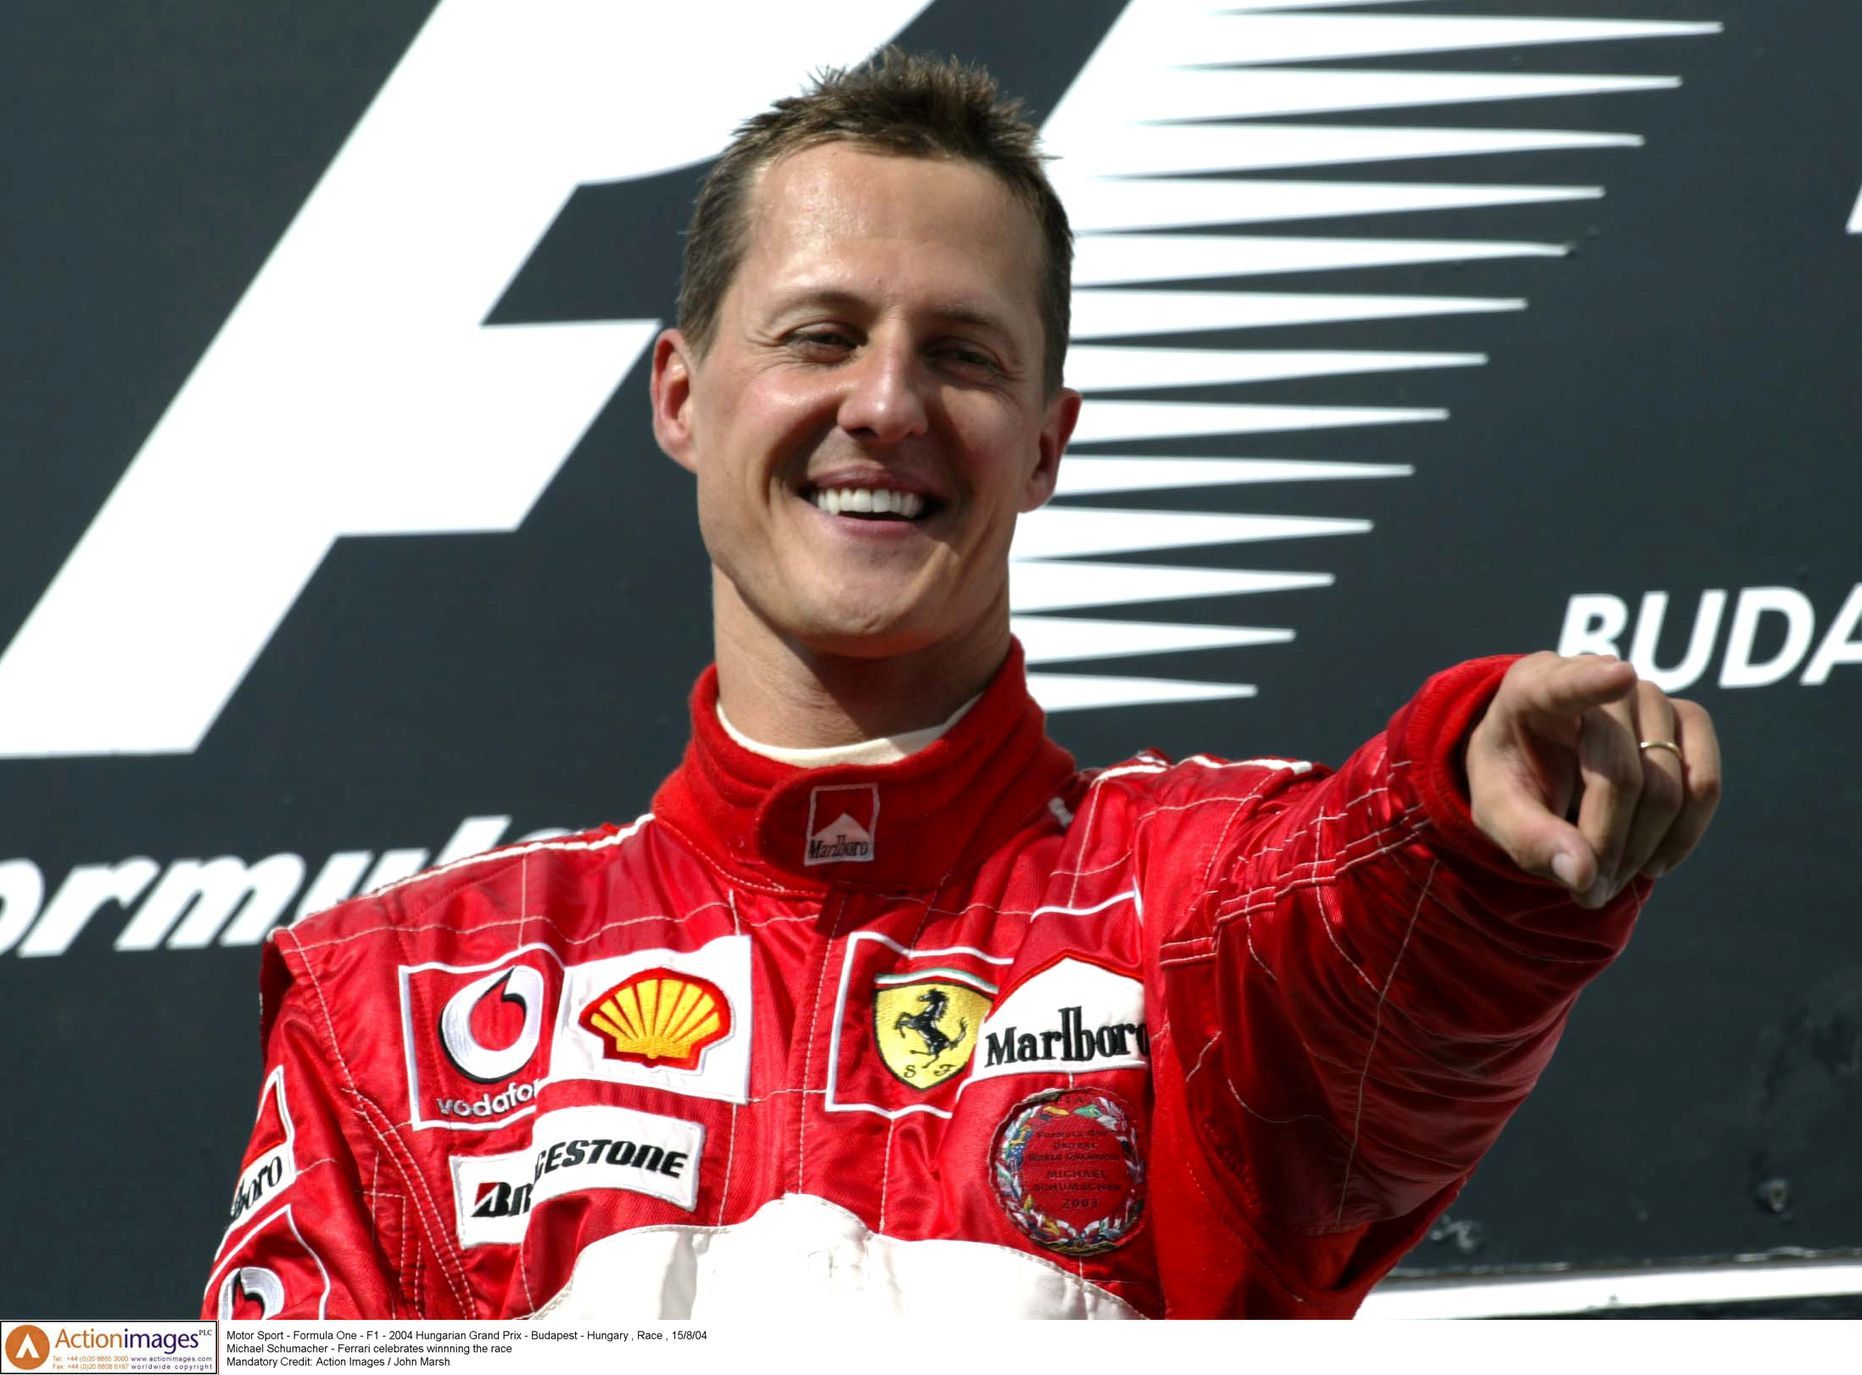 Even ten years after the “Schumi” crash, privacy is more valuable to the family than health news